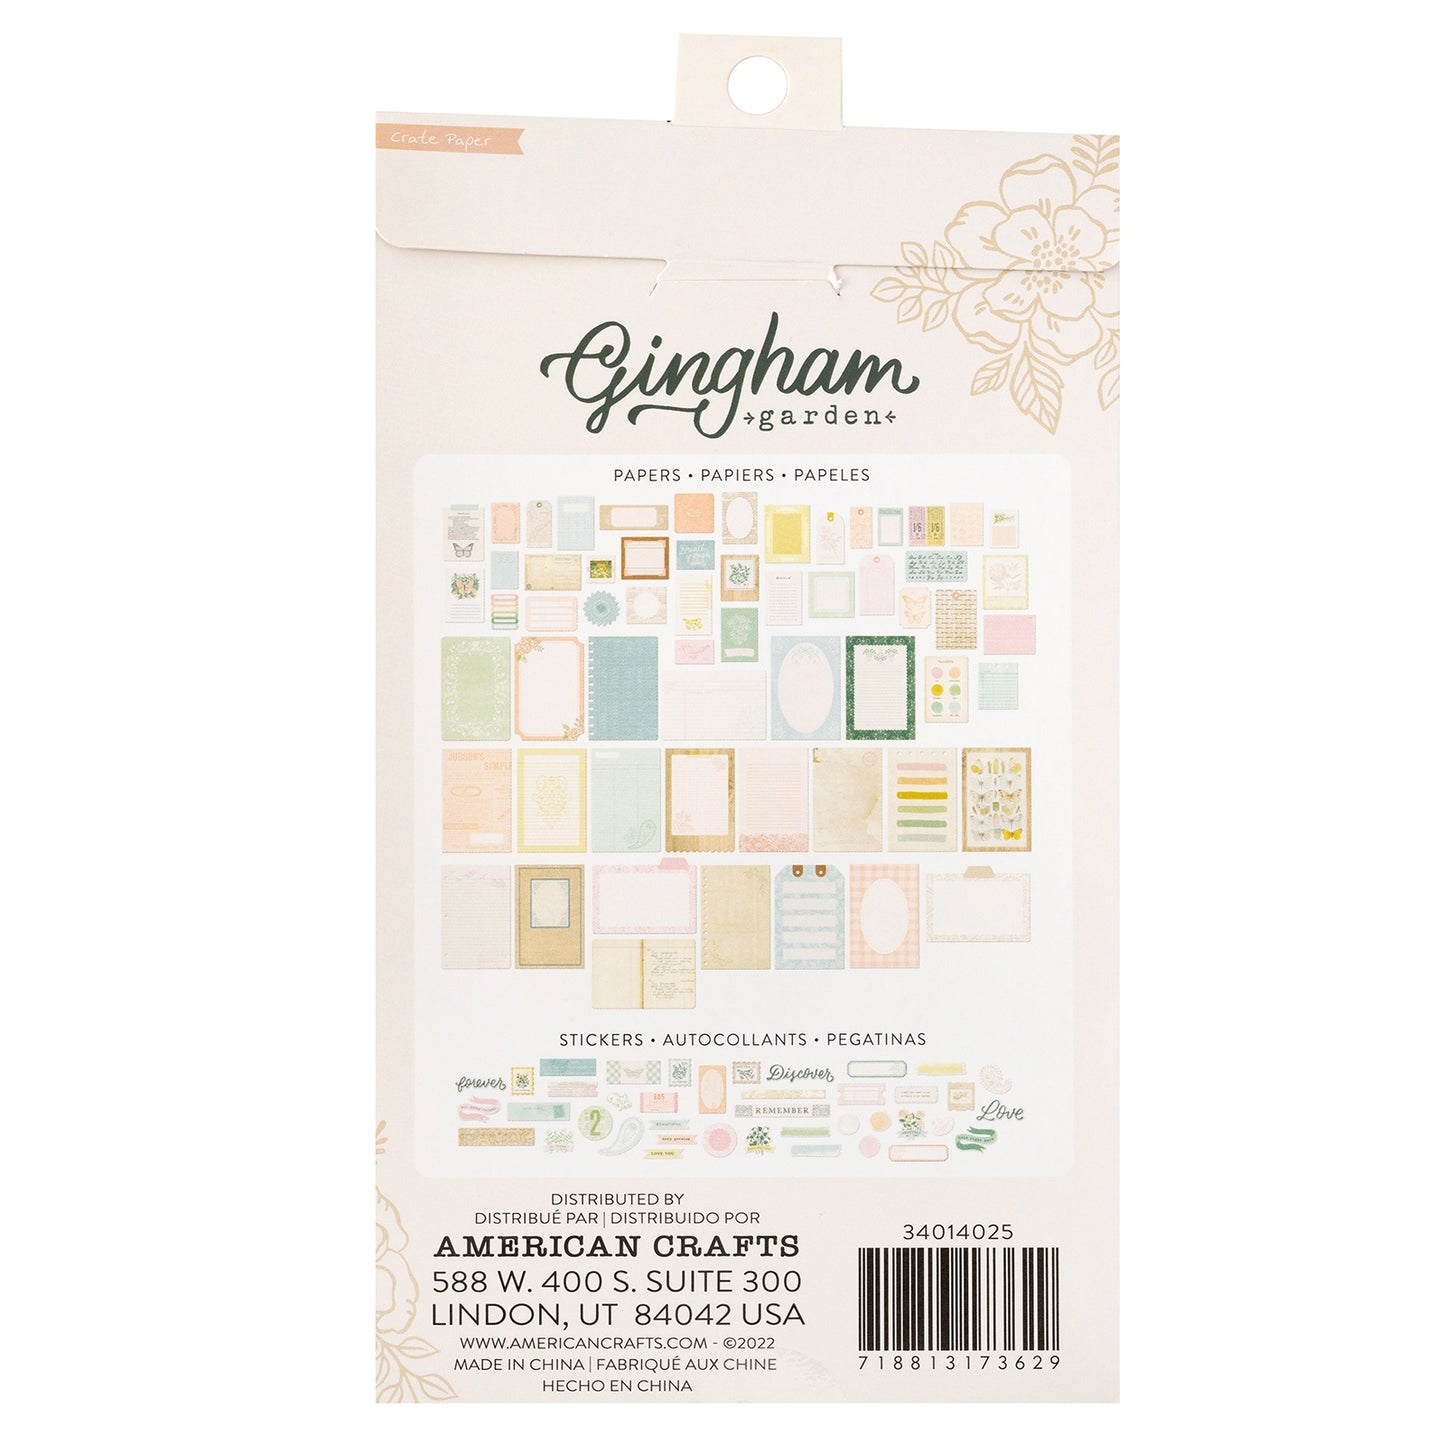 Gingham Garden Paperie Pack 200/Pkg-Paper Pieces & Washi Stickers